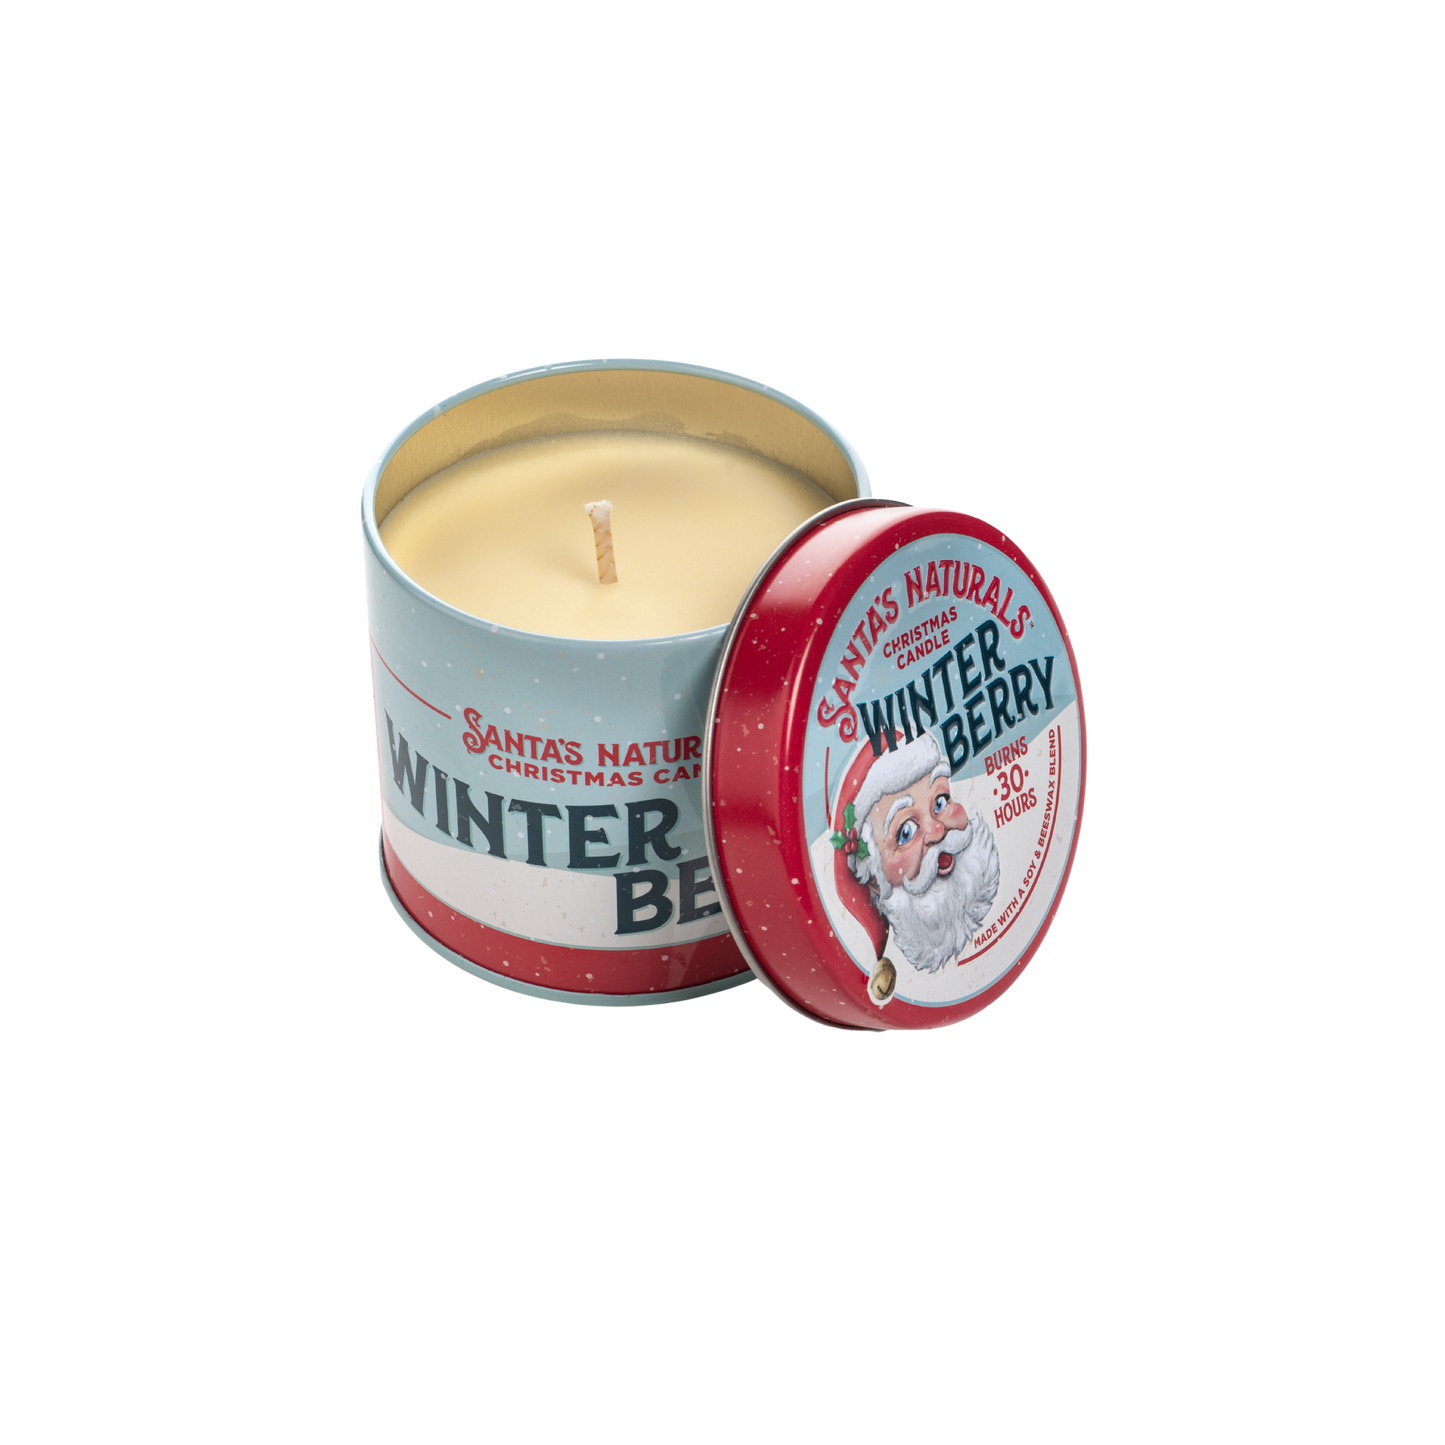 Santa's Naturals Winter Berry 9oz Candle - Case of 6 - Table Top Display